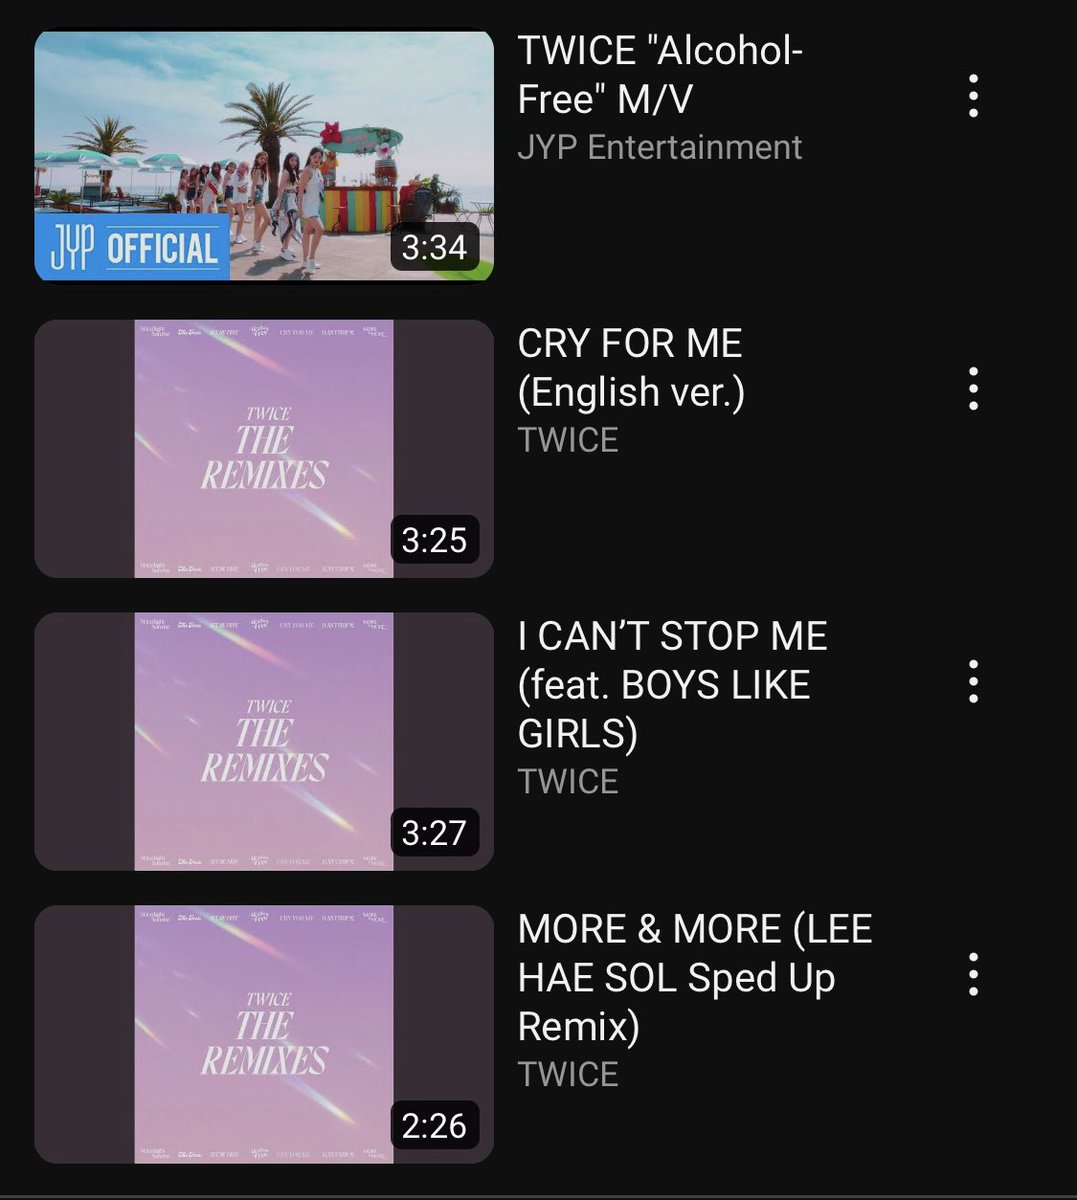 TWICEのリミックス詳細出た！

１.Moonlight Sunrise (Jonas Blue Remix)
２.The Feels (Ian Asher Remix)
３.Set Me Free (Carneyval Remix)
４.Alcohol Free (English Ver.)
５.Cry for Me (English Ver.)
６.I Can’t Stop Me (feat.BOYS LIKE GIRLS)
７.More&More (Lee Hae Sol Sped Up Remix)